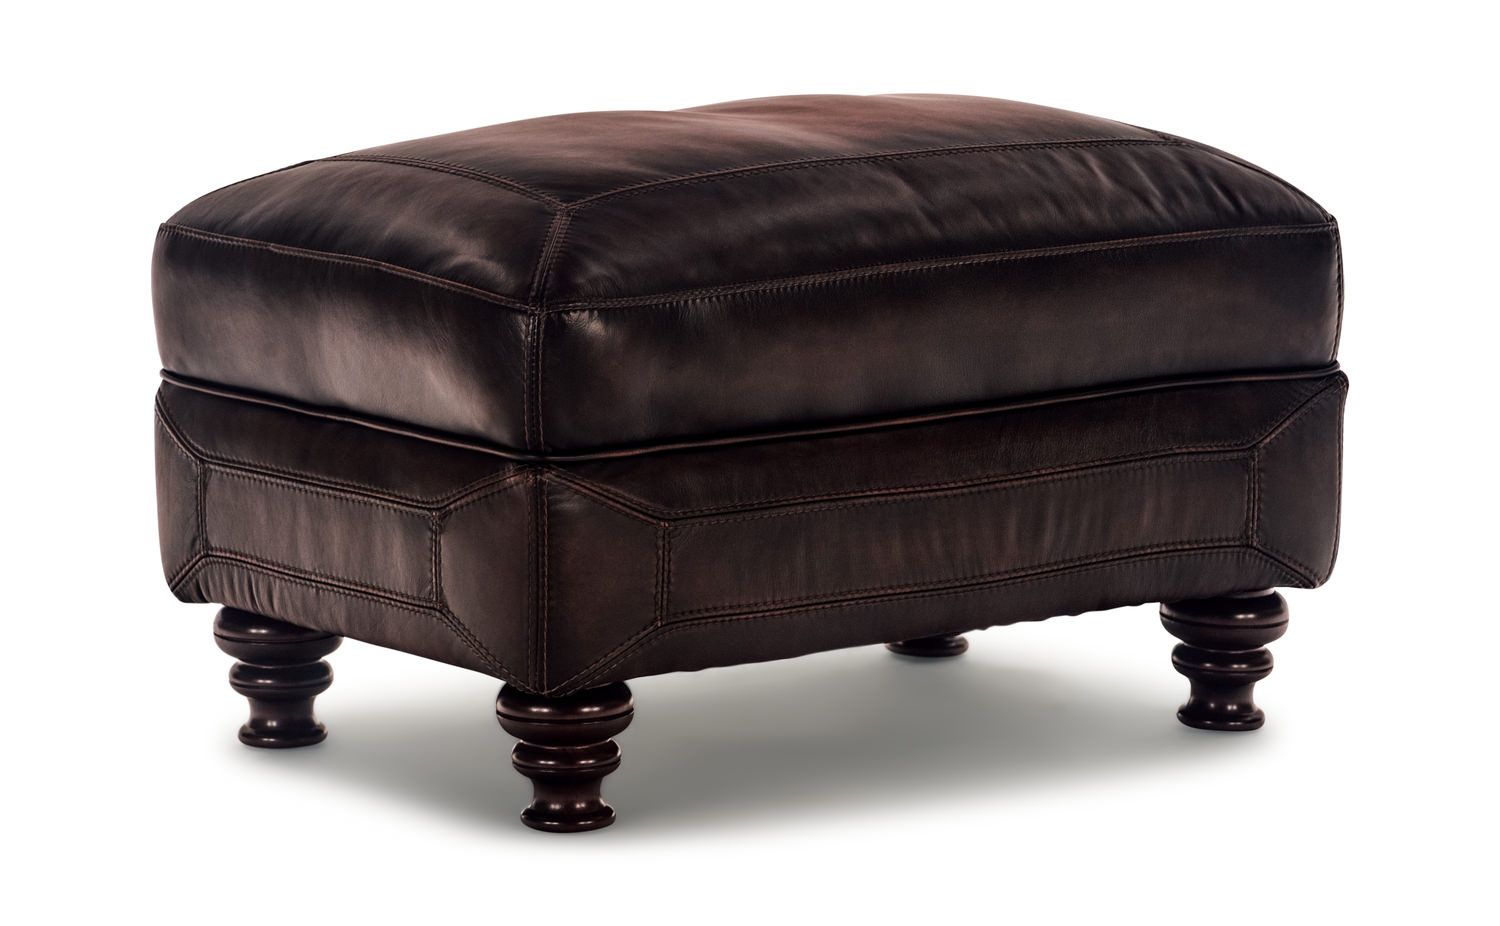 Charlie Leather Ottomanthomas Cole | Hom Furniture With Beige Thomas Ottomans (View 13 of 15)